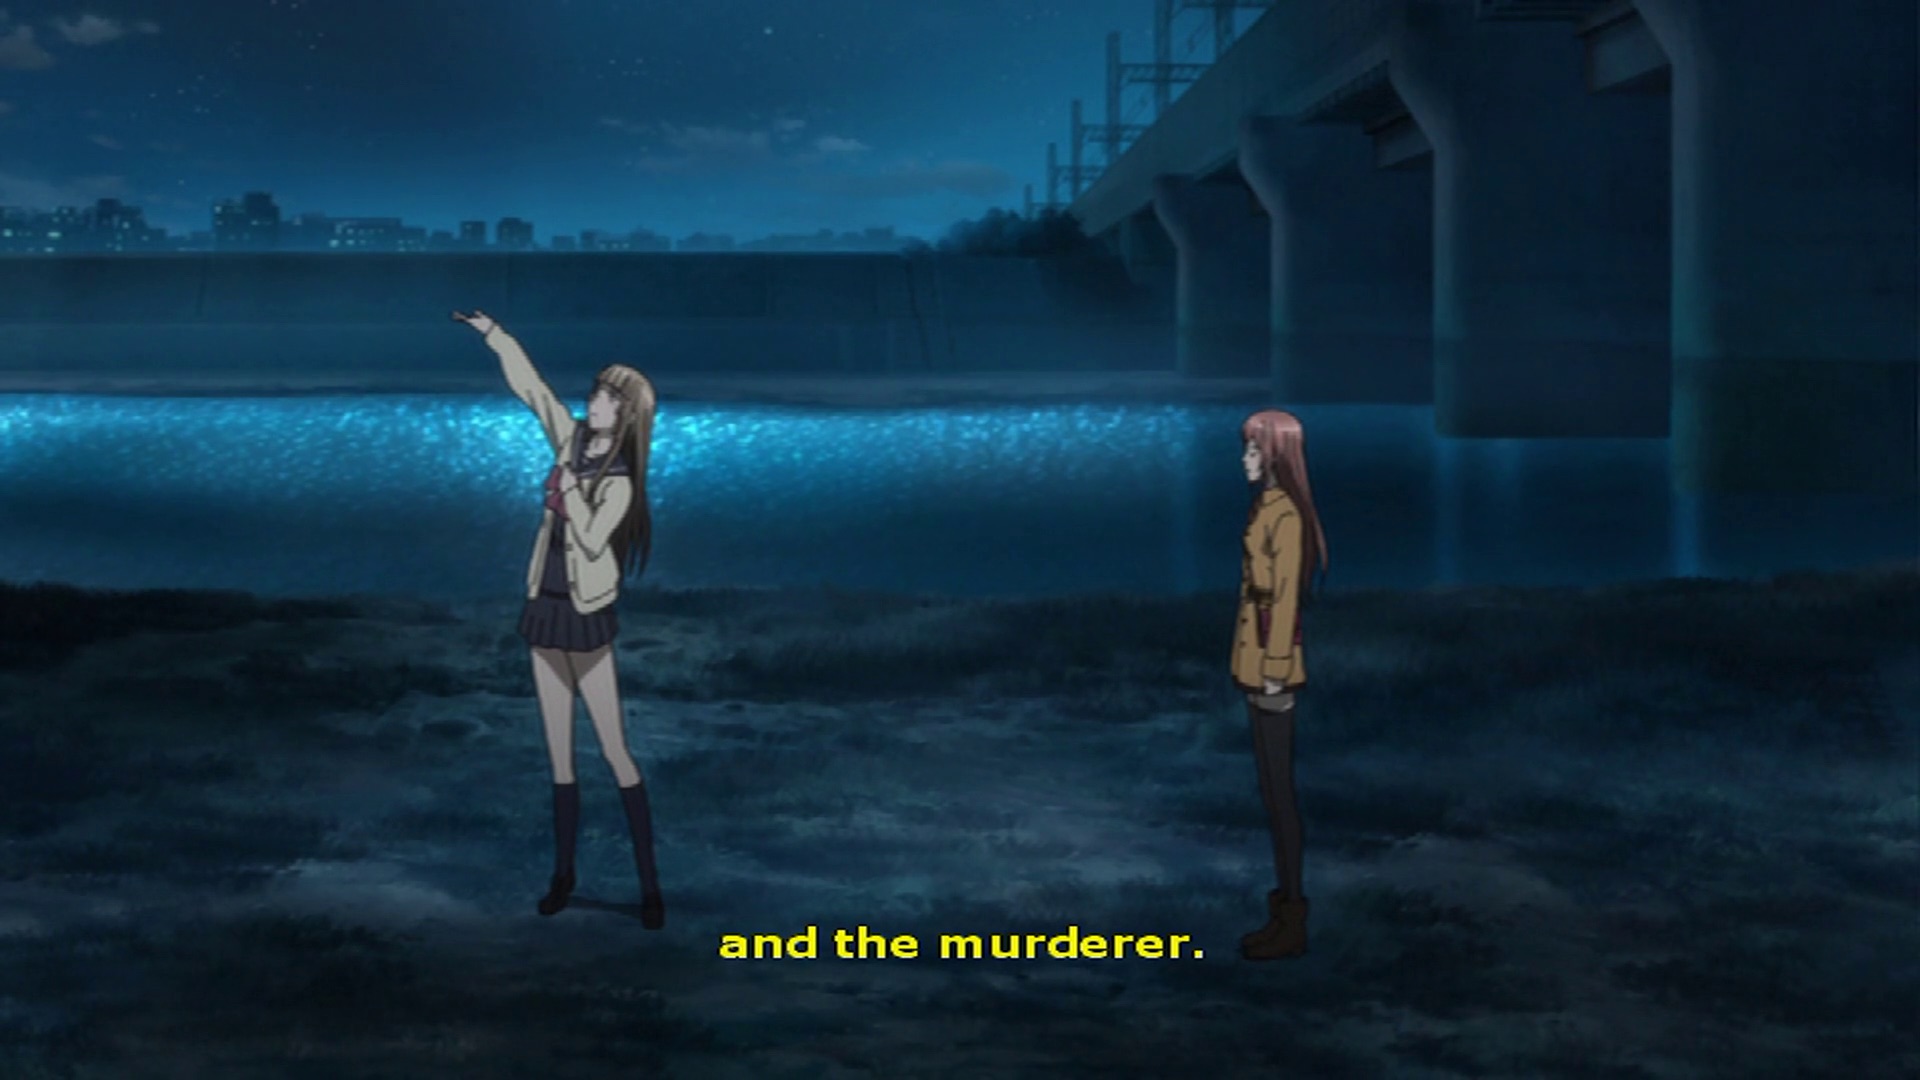 An anime girl says "and the murderer"